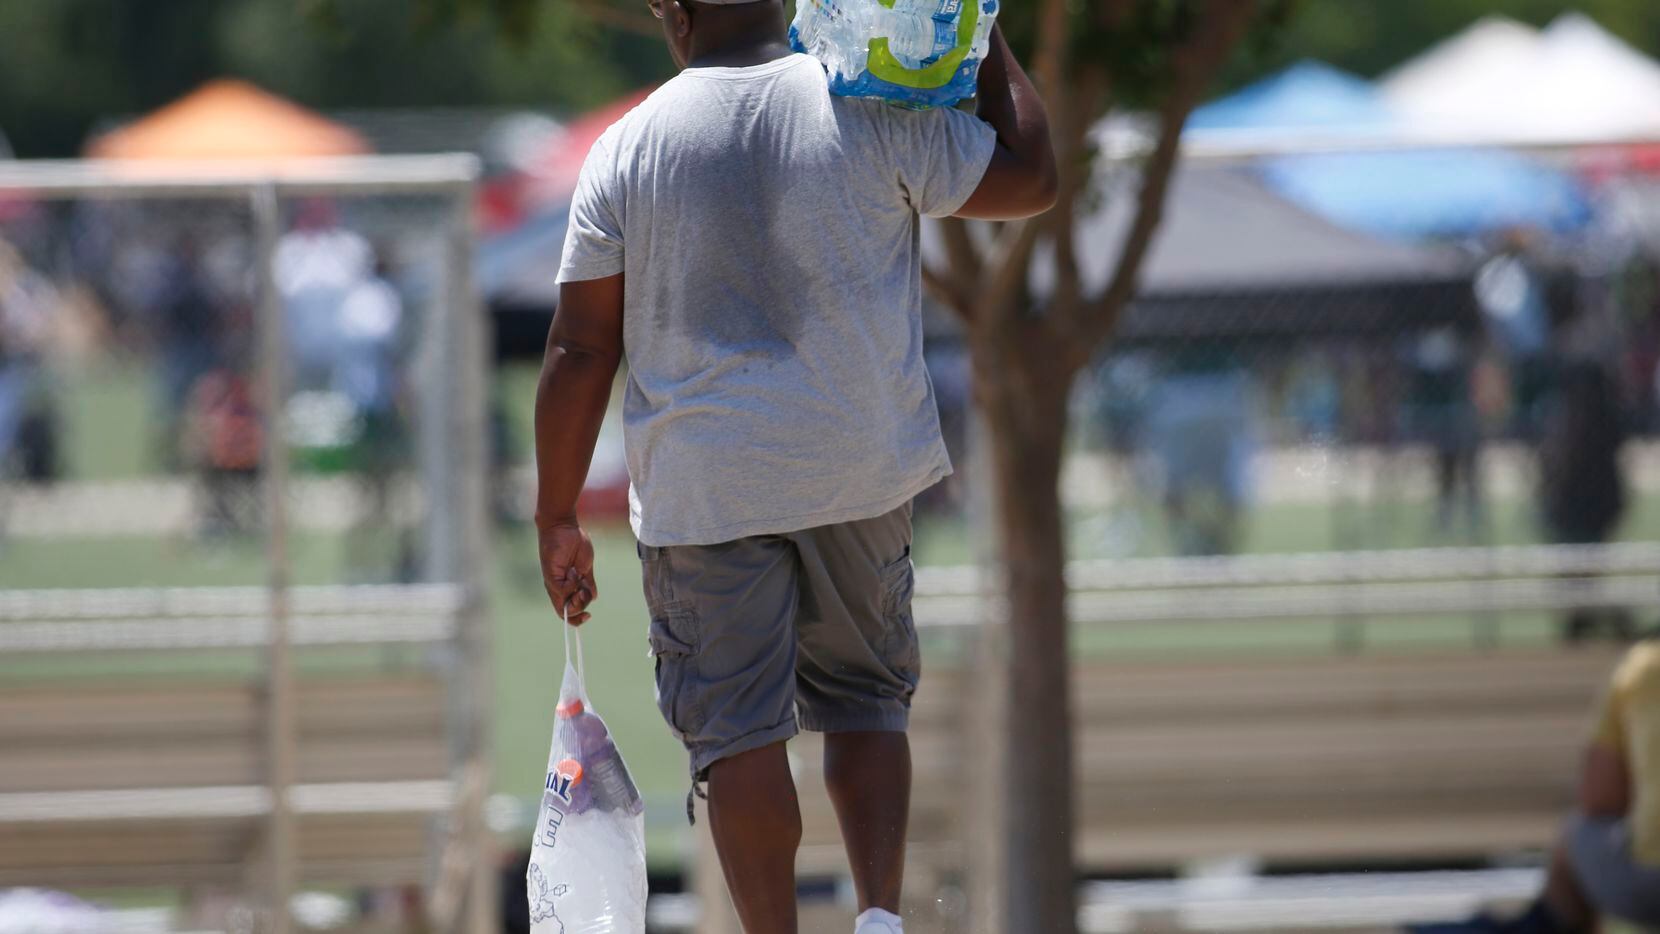 A football enthusiast heads to one of the playing fields with iced drinks and water to help...